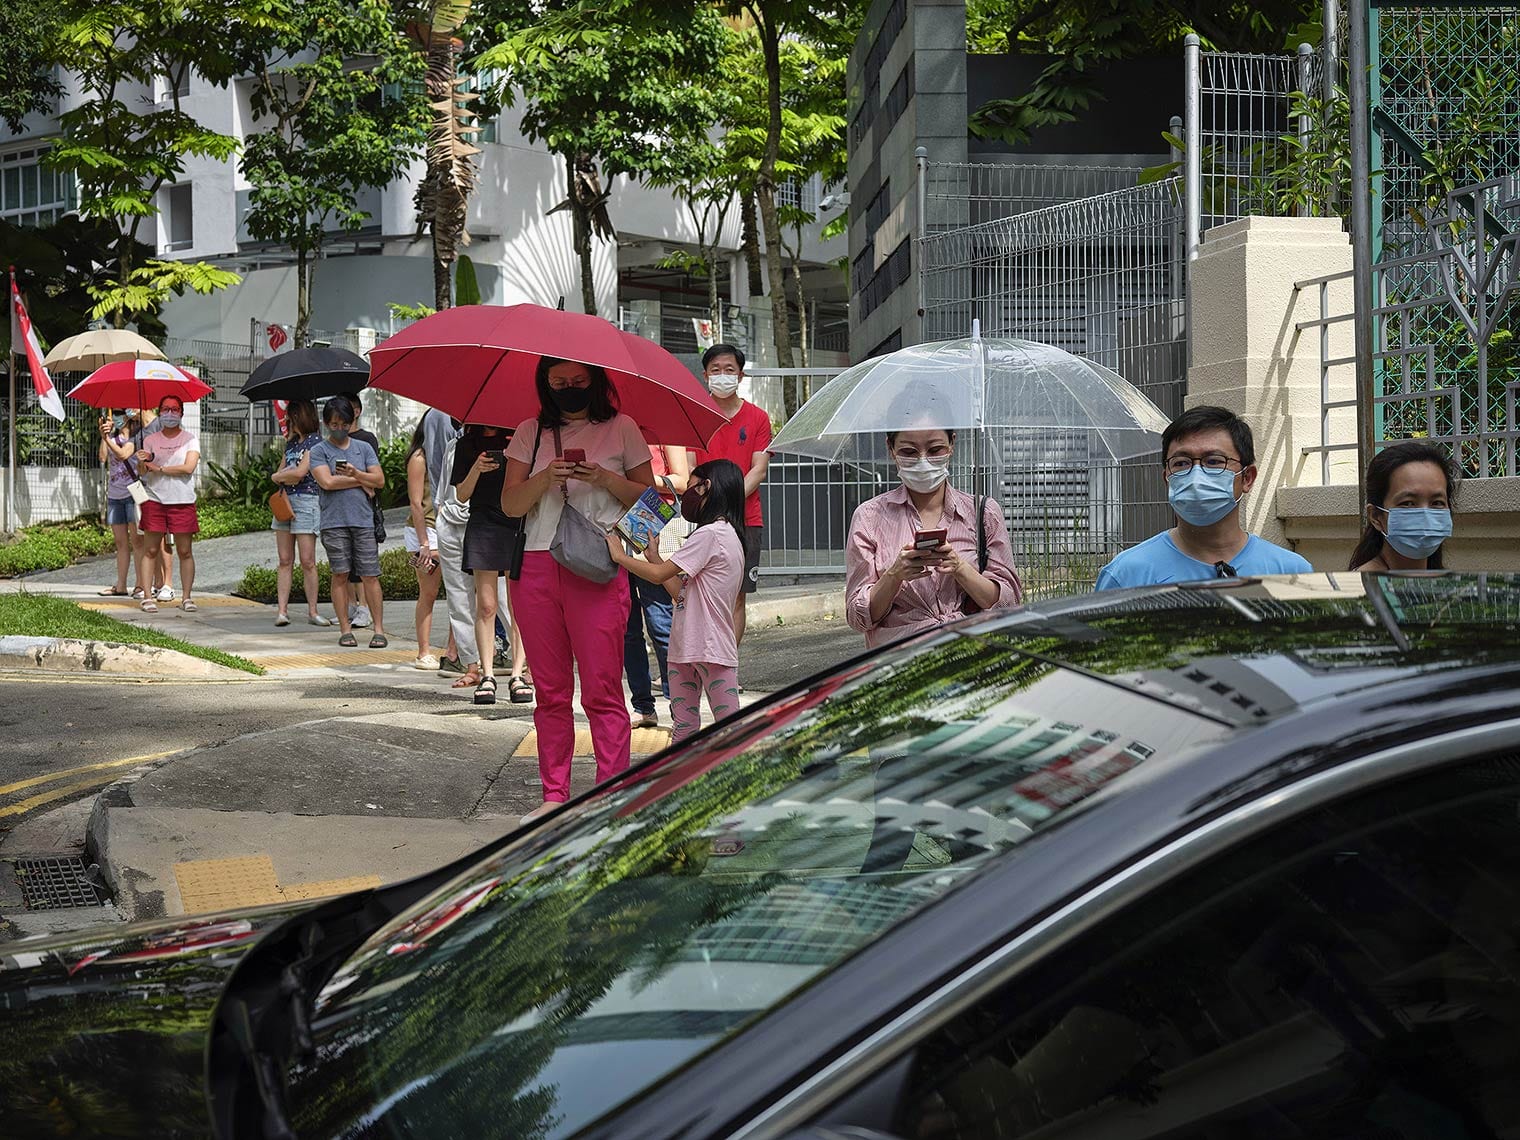 People wearing masks and standing under umbrellas wait in a socially distanced line on a tree-lined city street